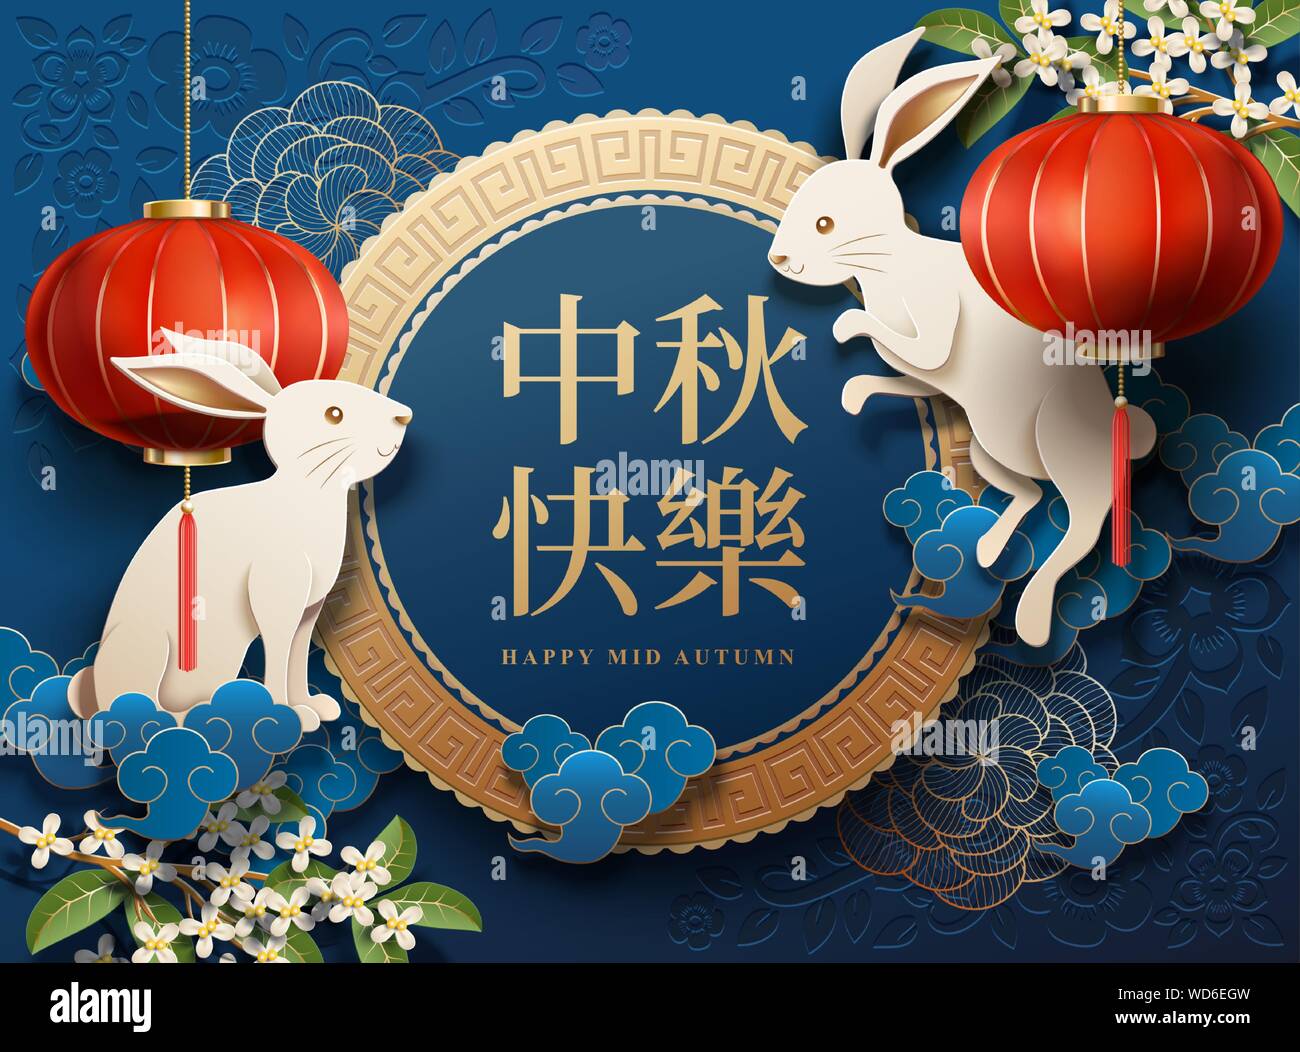 Happy mid autumn festival design with white rabbit and lanterns elements on blue background, Holiday name written in Chinese words Stock Vector